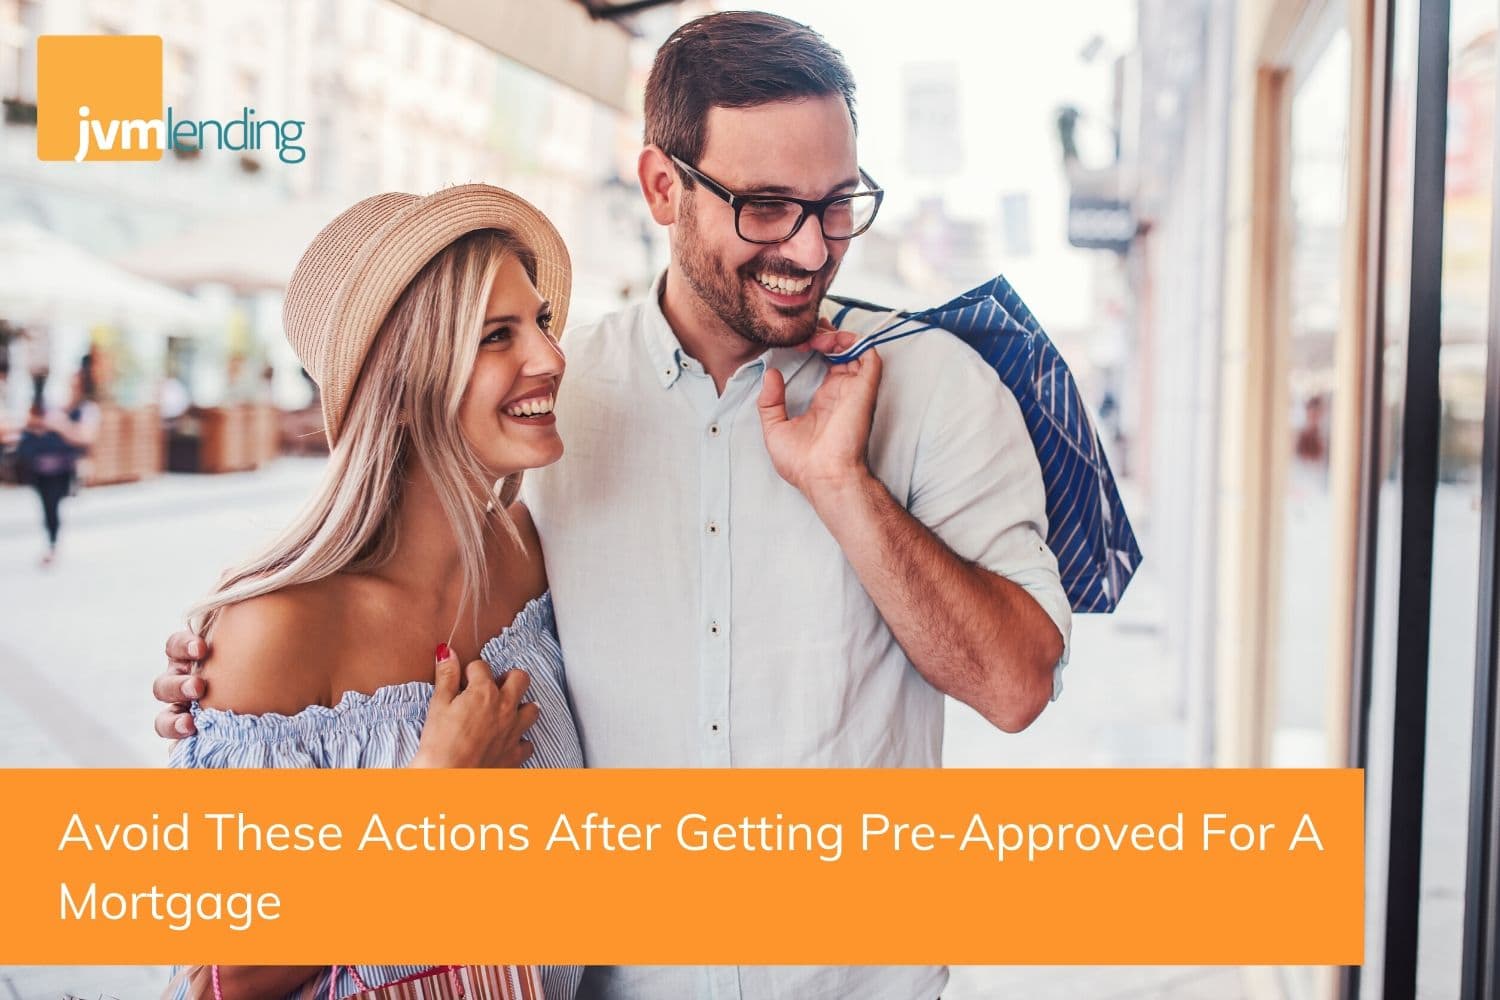 a young couple is out shopping together downtown. Homebuyers should not take on new debt from increasing credit card balances after getting pre-approved for a mortgage..